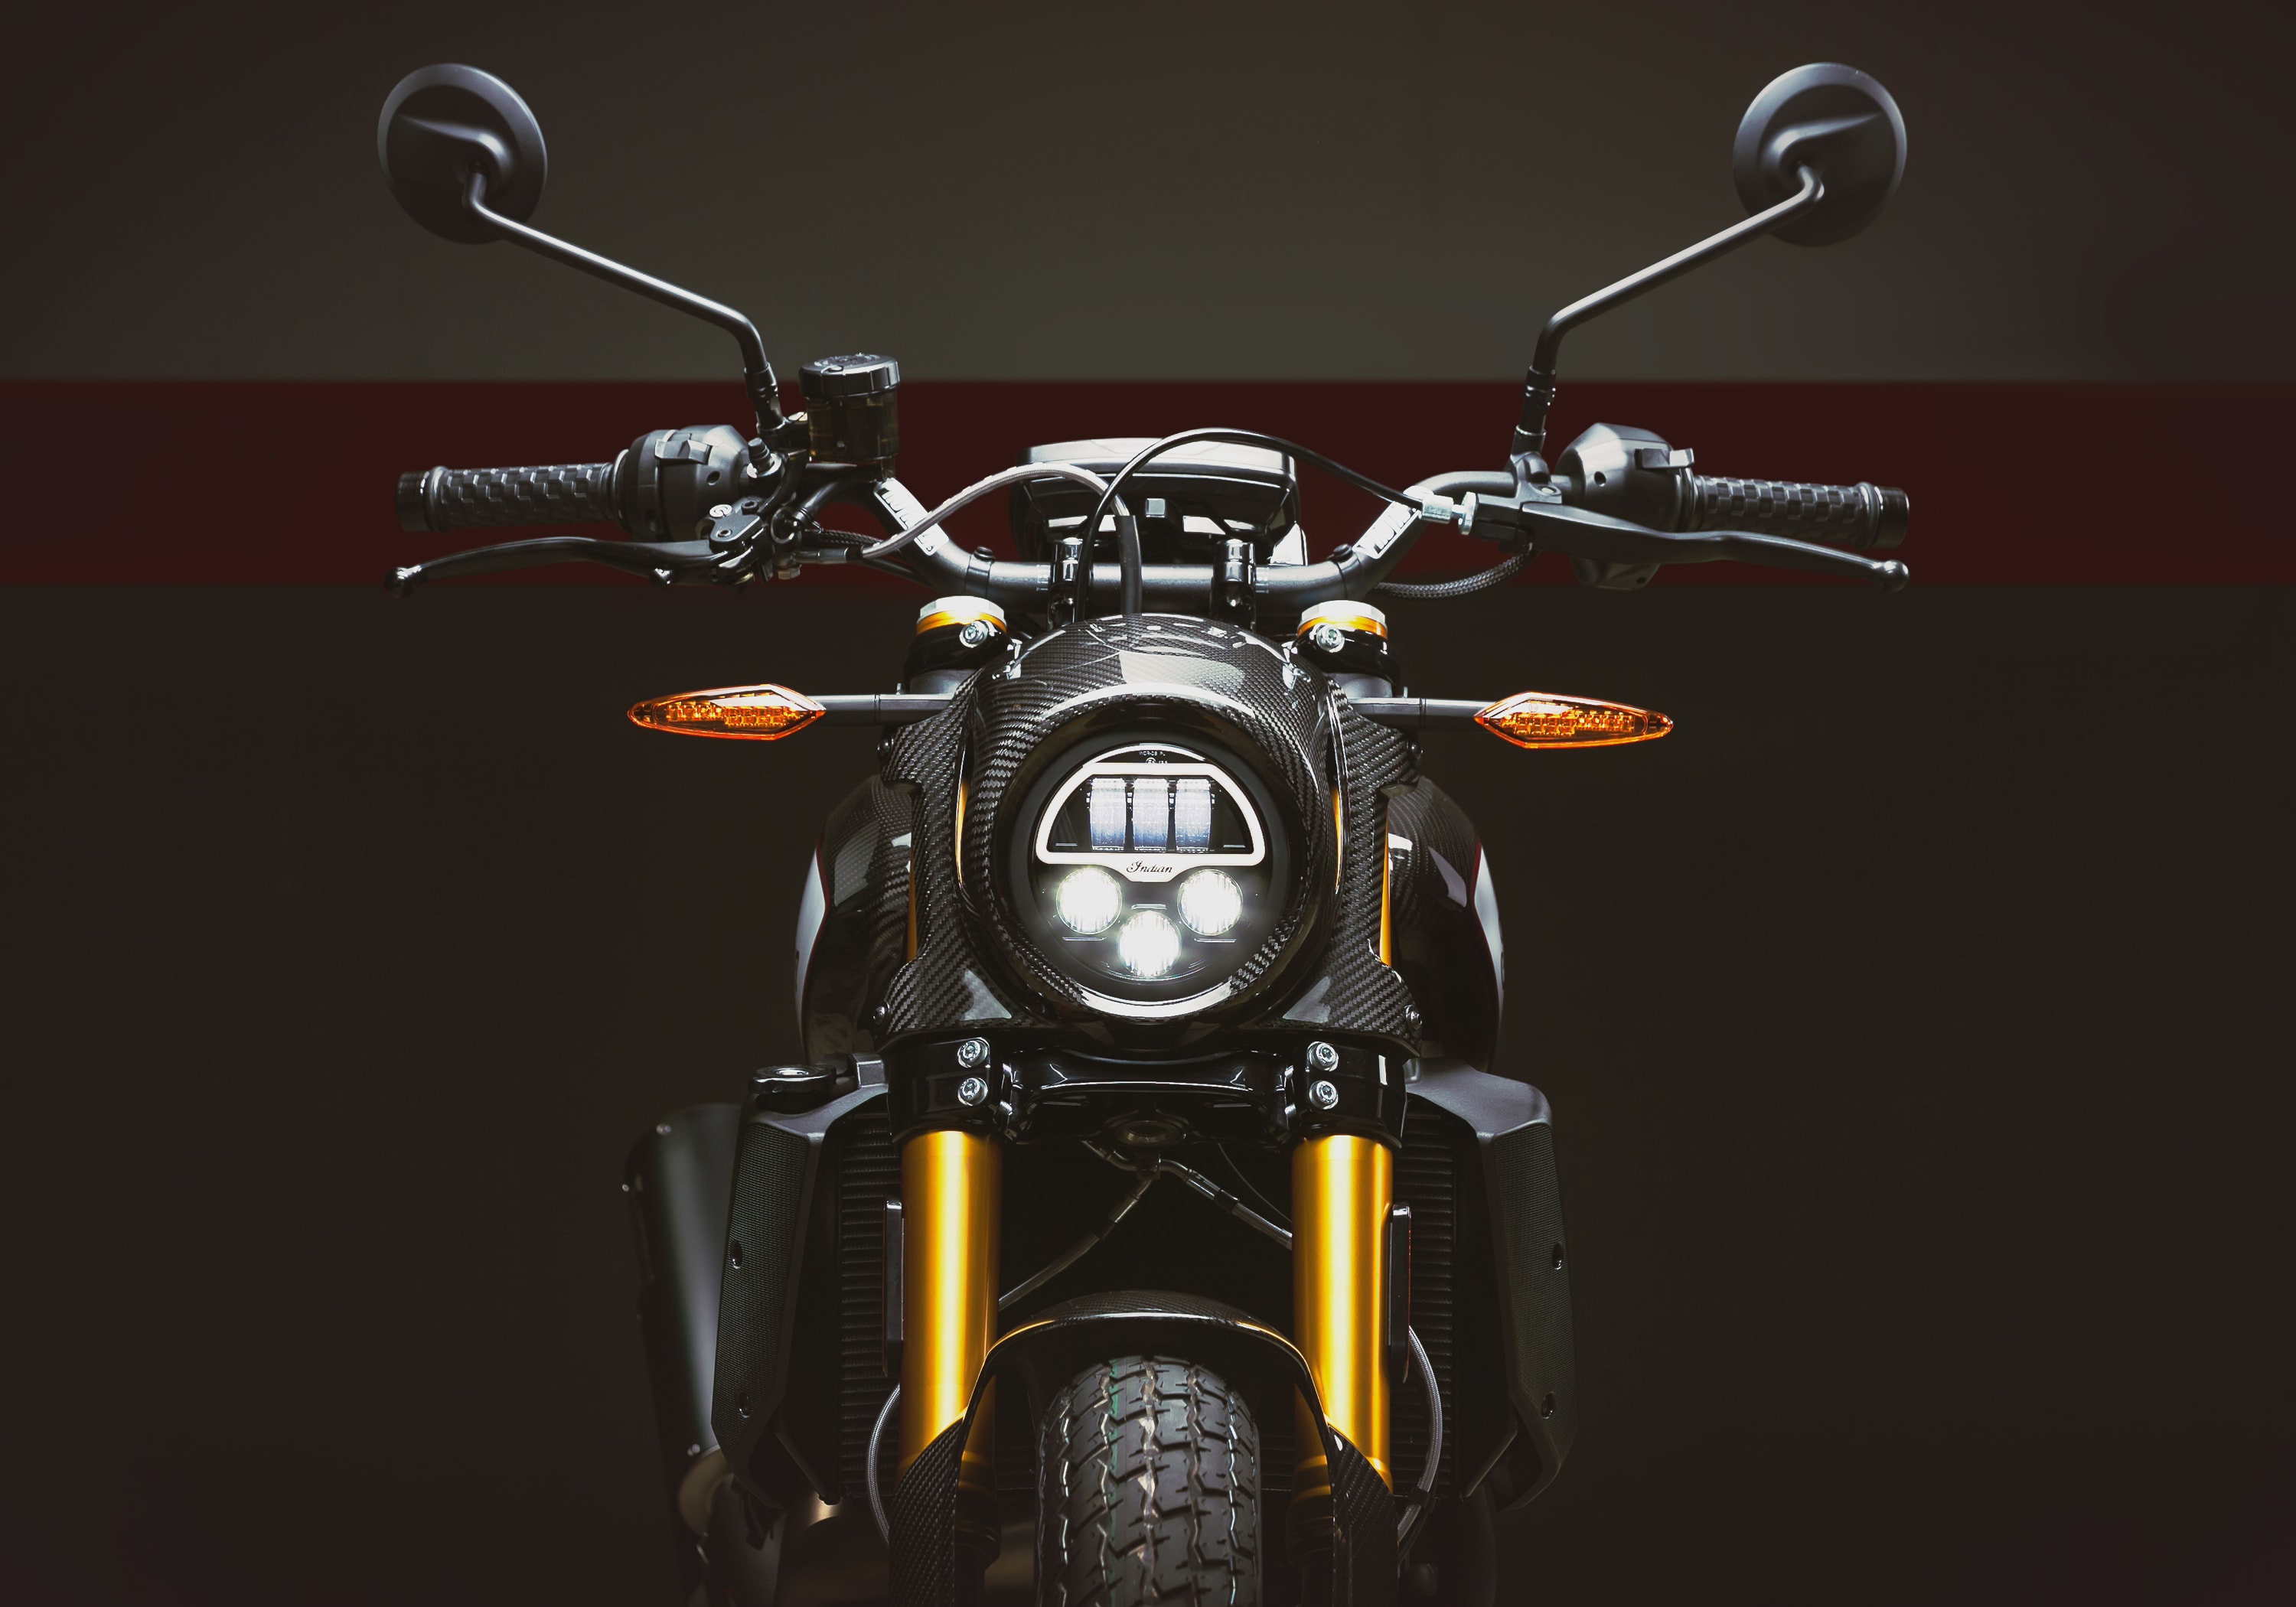 Indian Motorcycle 推出 2020 年式樣 FTR 1200 Carbon 車款